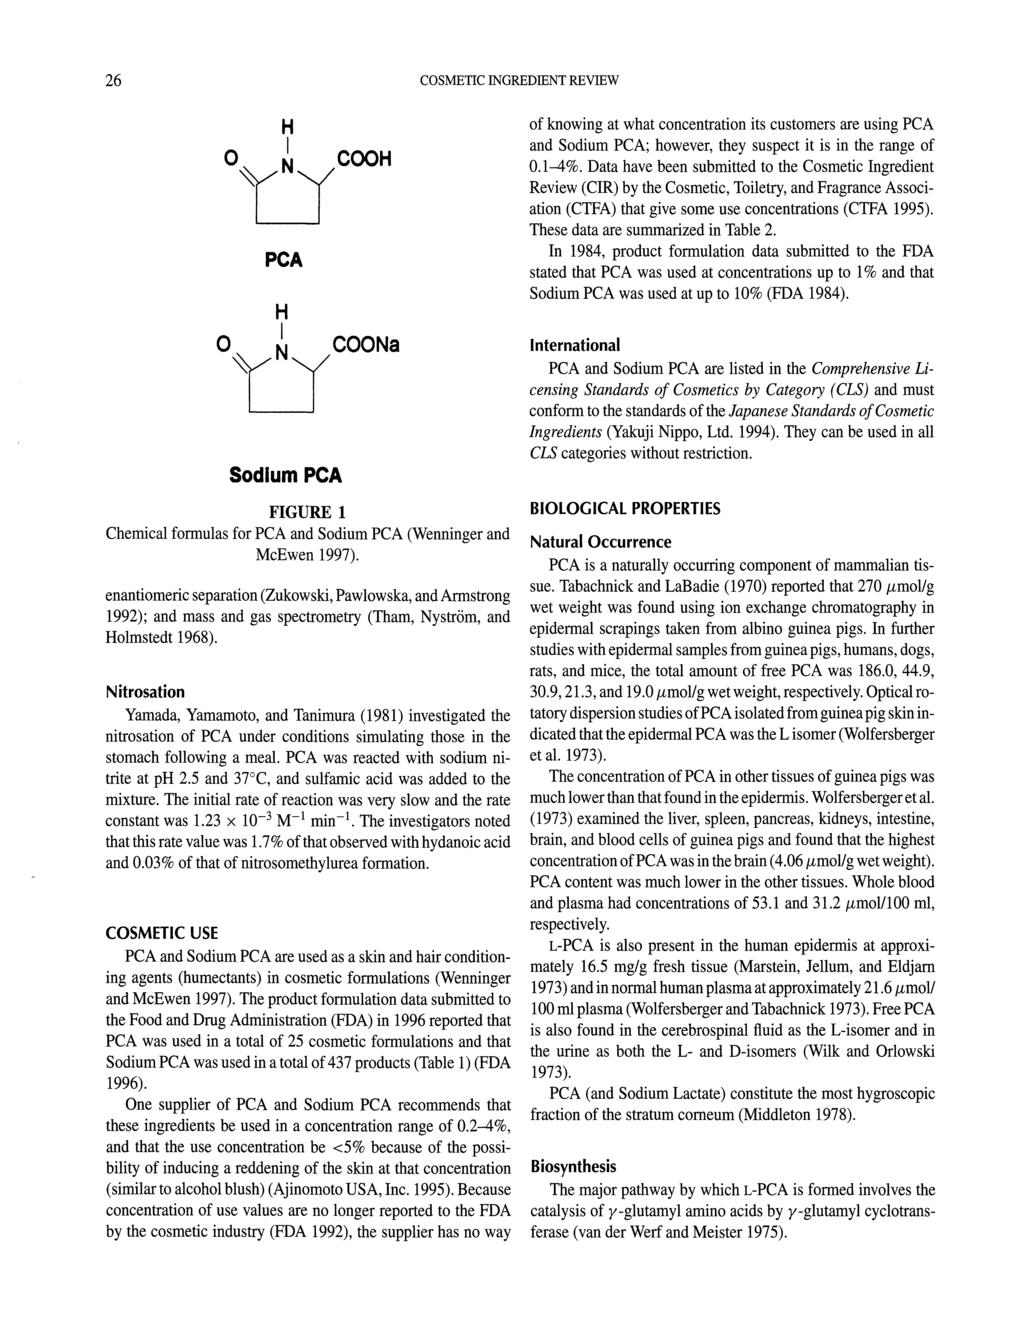 26 COSMETIC INGREDIENT REVIEW H Ot:JCOOH PCA H Ot:.rCOONa Sodium PCA FIGURE 1 Chemical formulas for PCA and Sodium PCA (Wenninger and McEwen 1997).